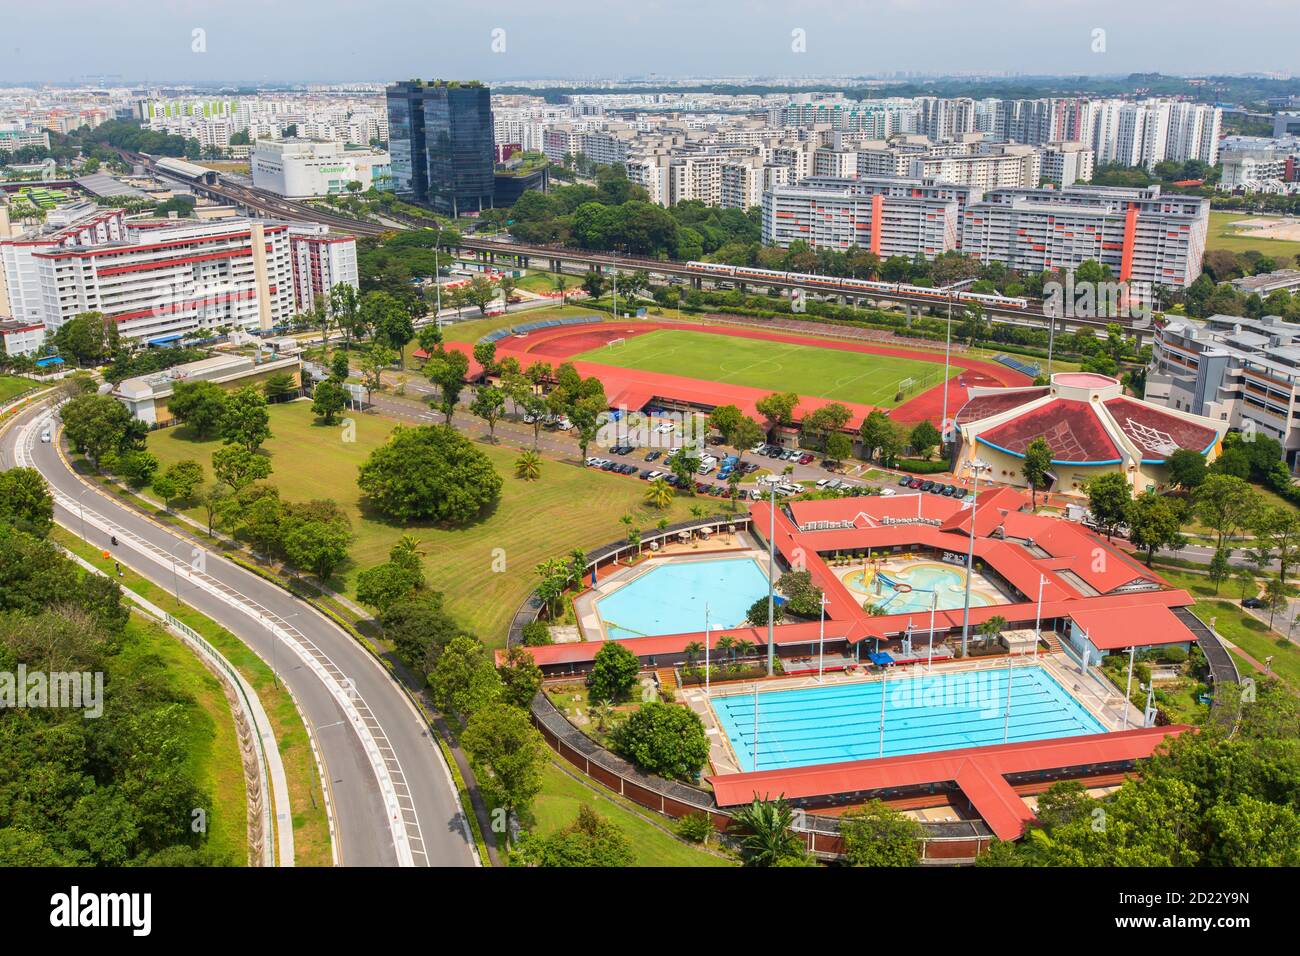 Aerial view of Woodlands civic infrastructure that consists of housings, swimming pools, stadium, offices, shopping malls, train station and more. Stock Photo